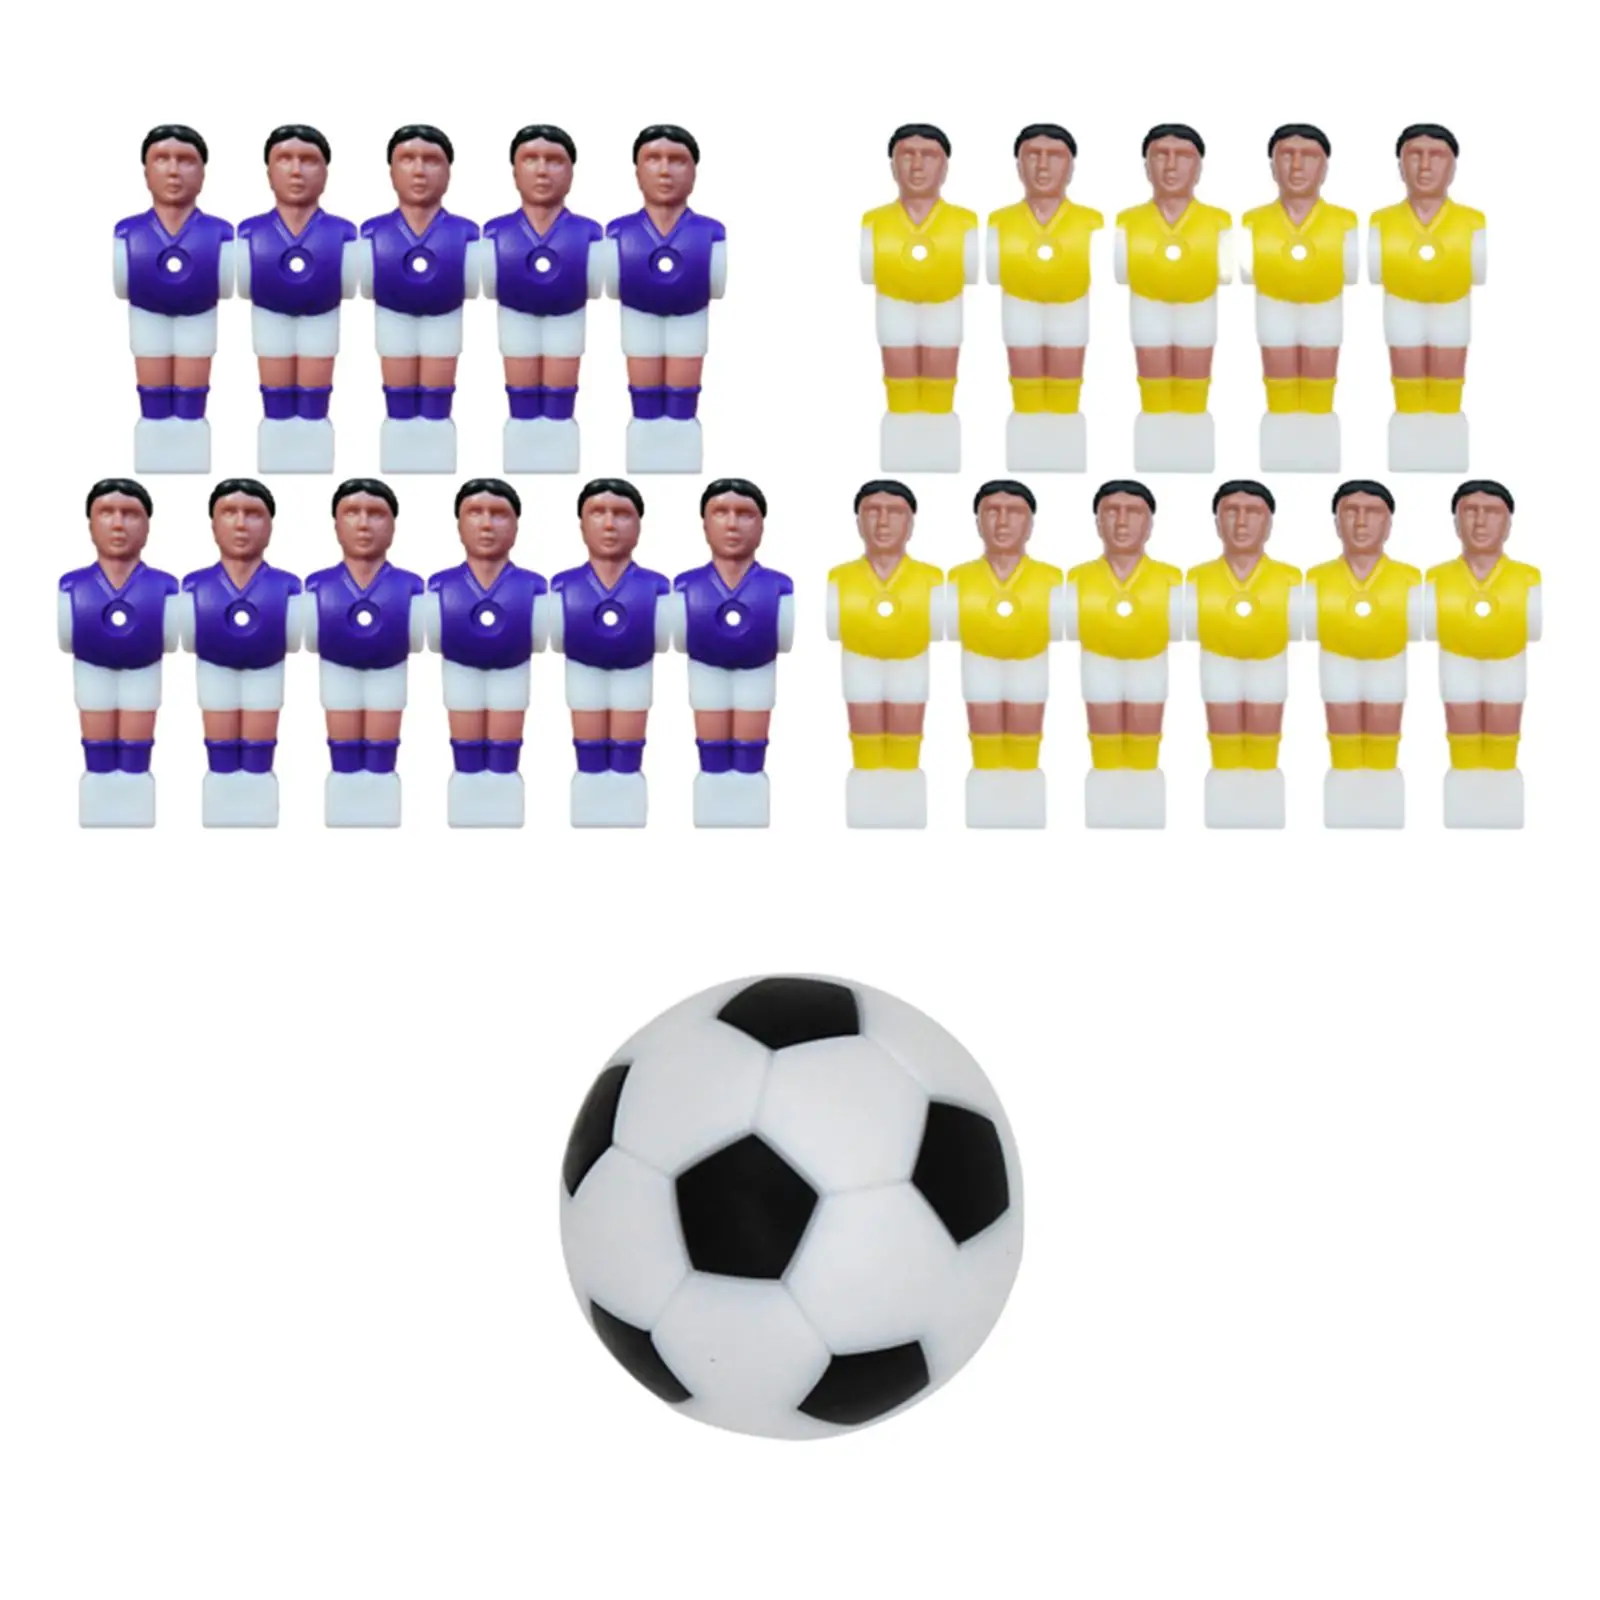 Foosball Men Replacement, Resin Soccer Table Player Football Players Figure, Table Soccer Men Toys,